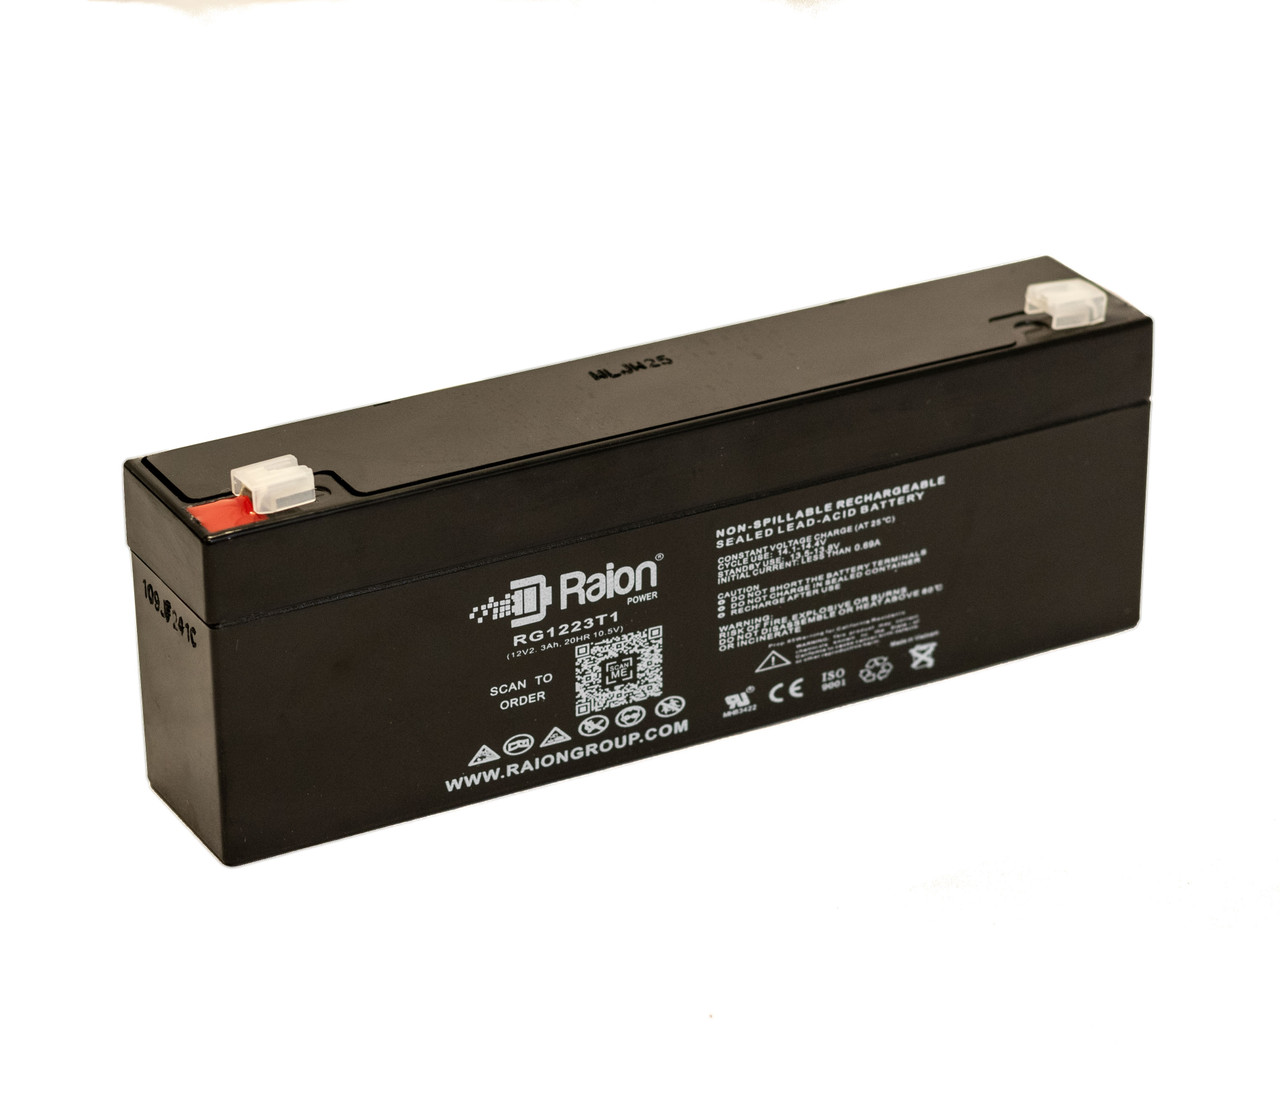 Raion Power RG1223T1 Replacement Battery for Intermec/Norand PS1220